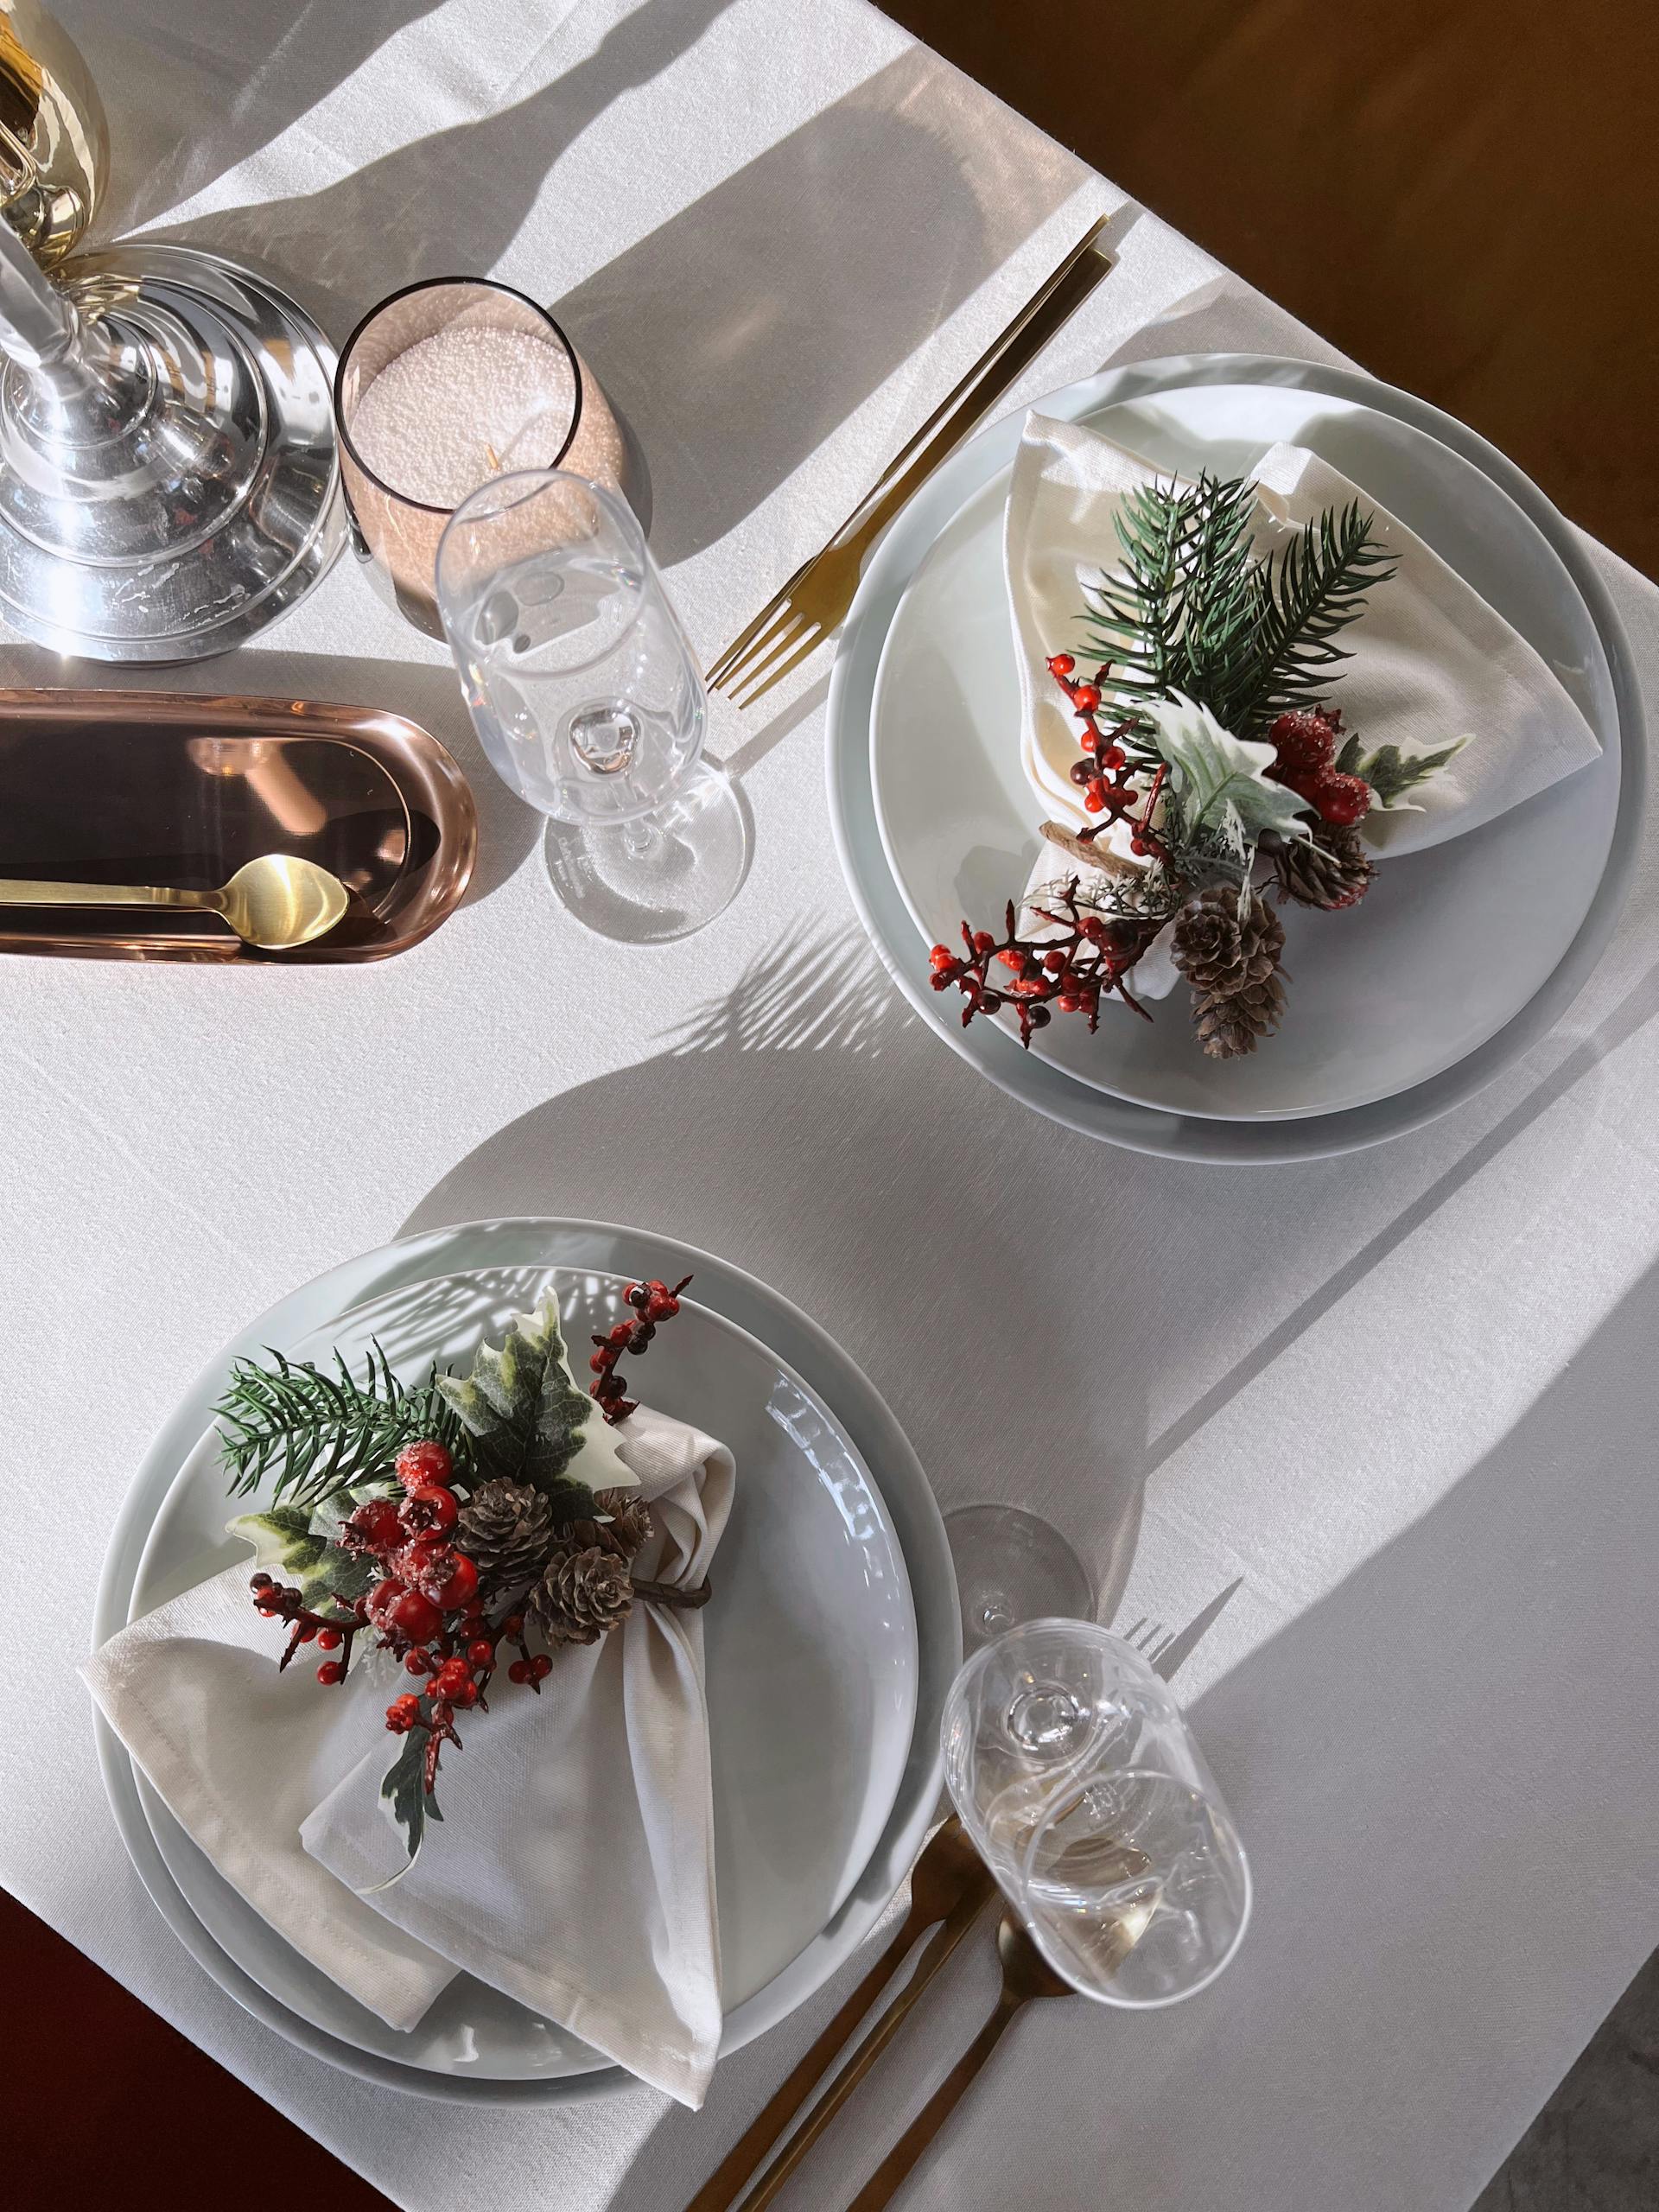 A set table with napkins decorated with pine twigs and cones | Source: Pexels